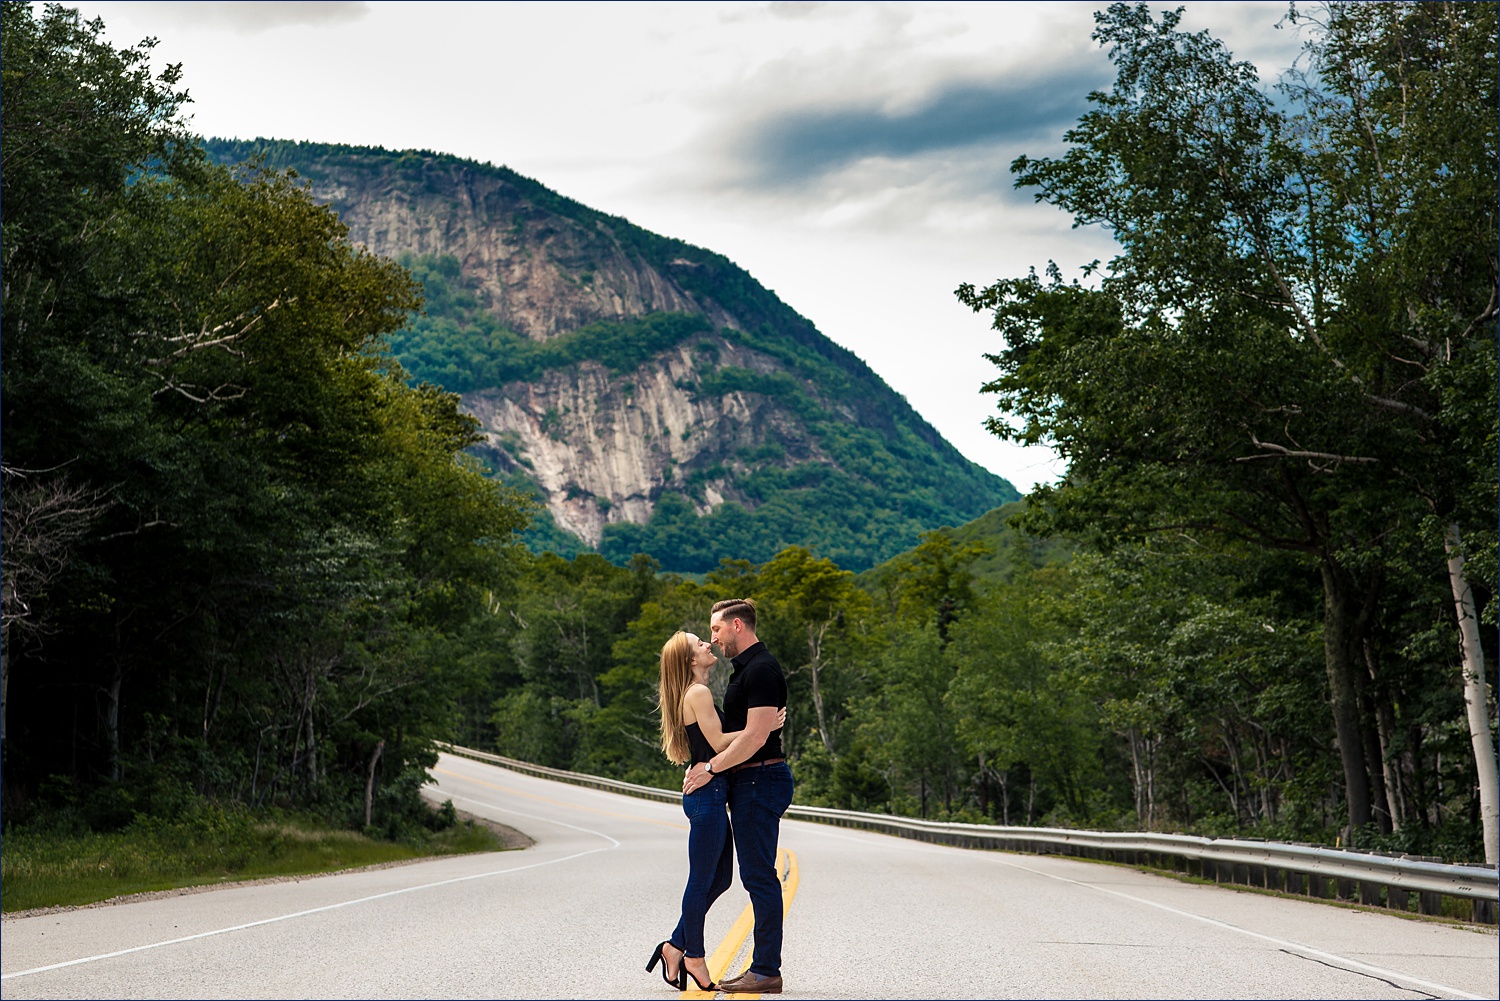 The couple kiss in front of the White Mountains of New Hampshire up in Crawford Notch